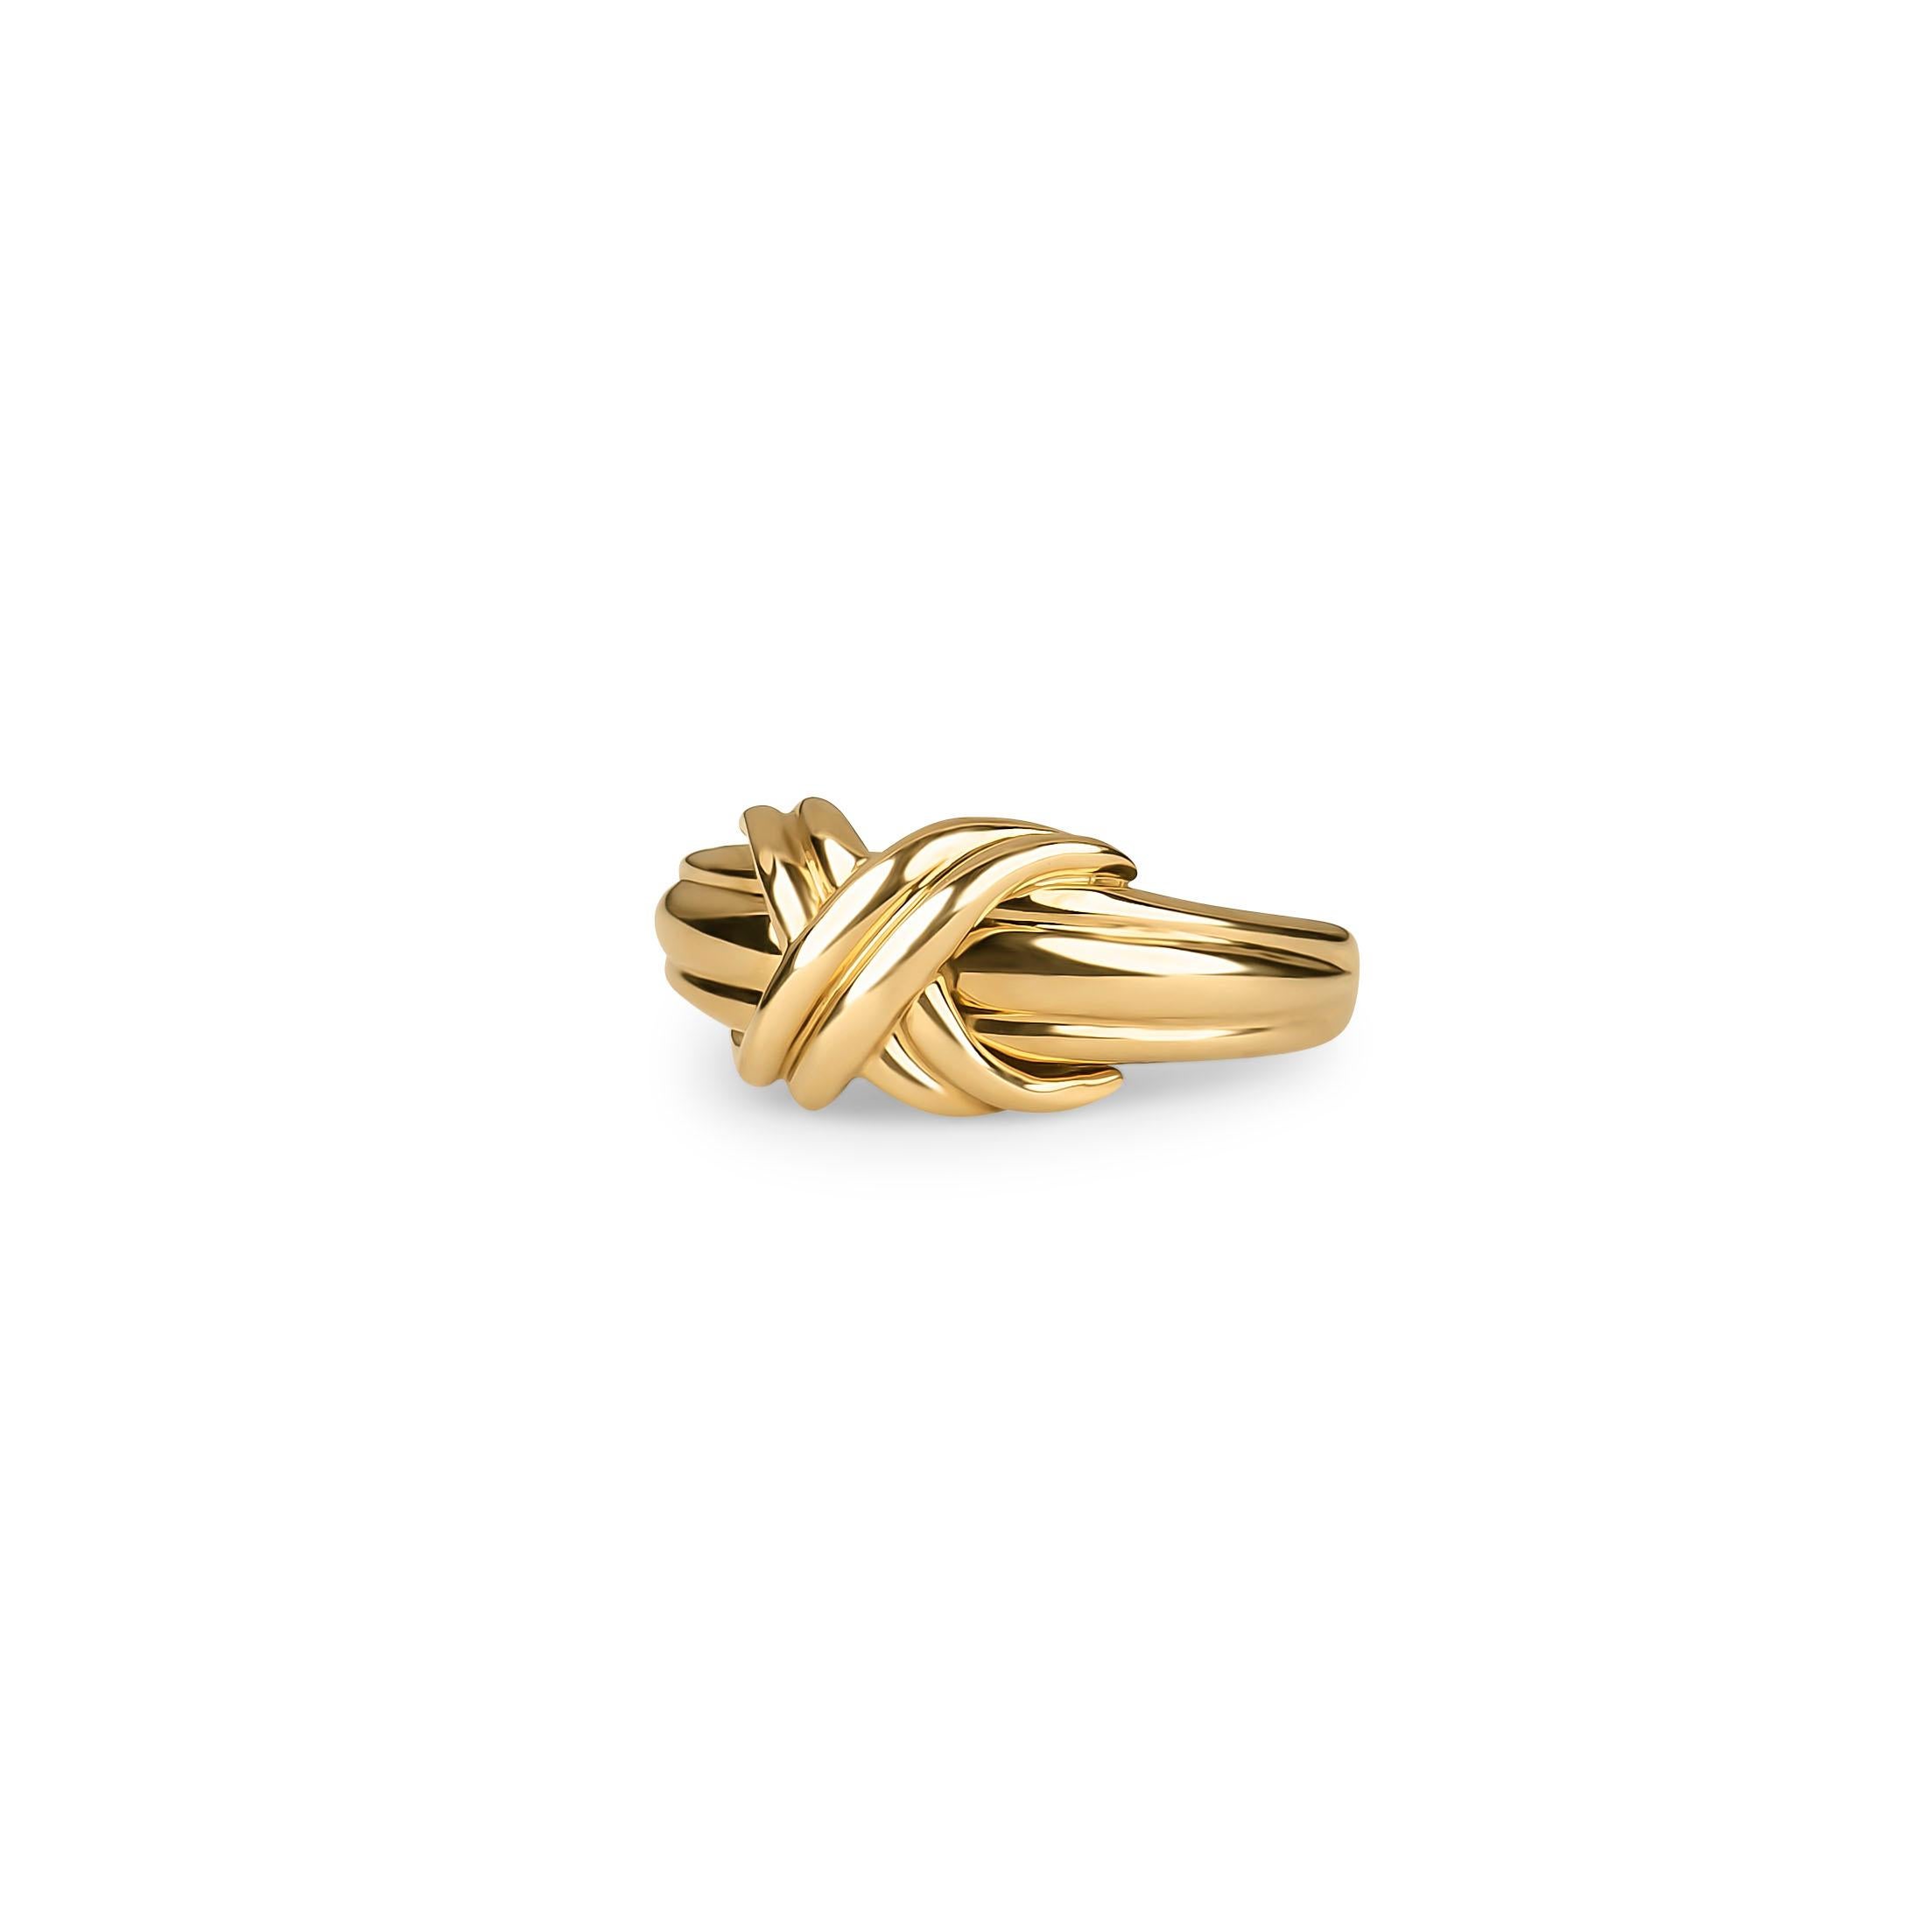 Tiffany &Co. Signature X ring in 18k yellow gold. Ring size 6